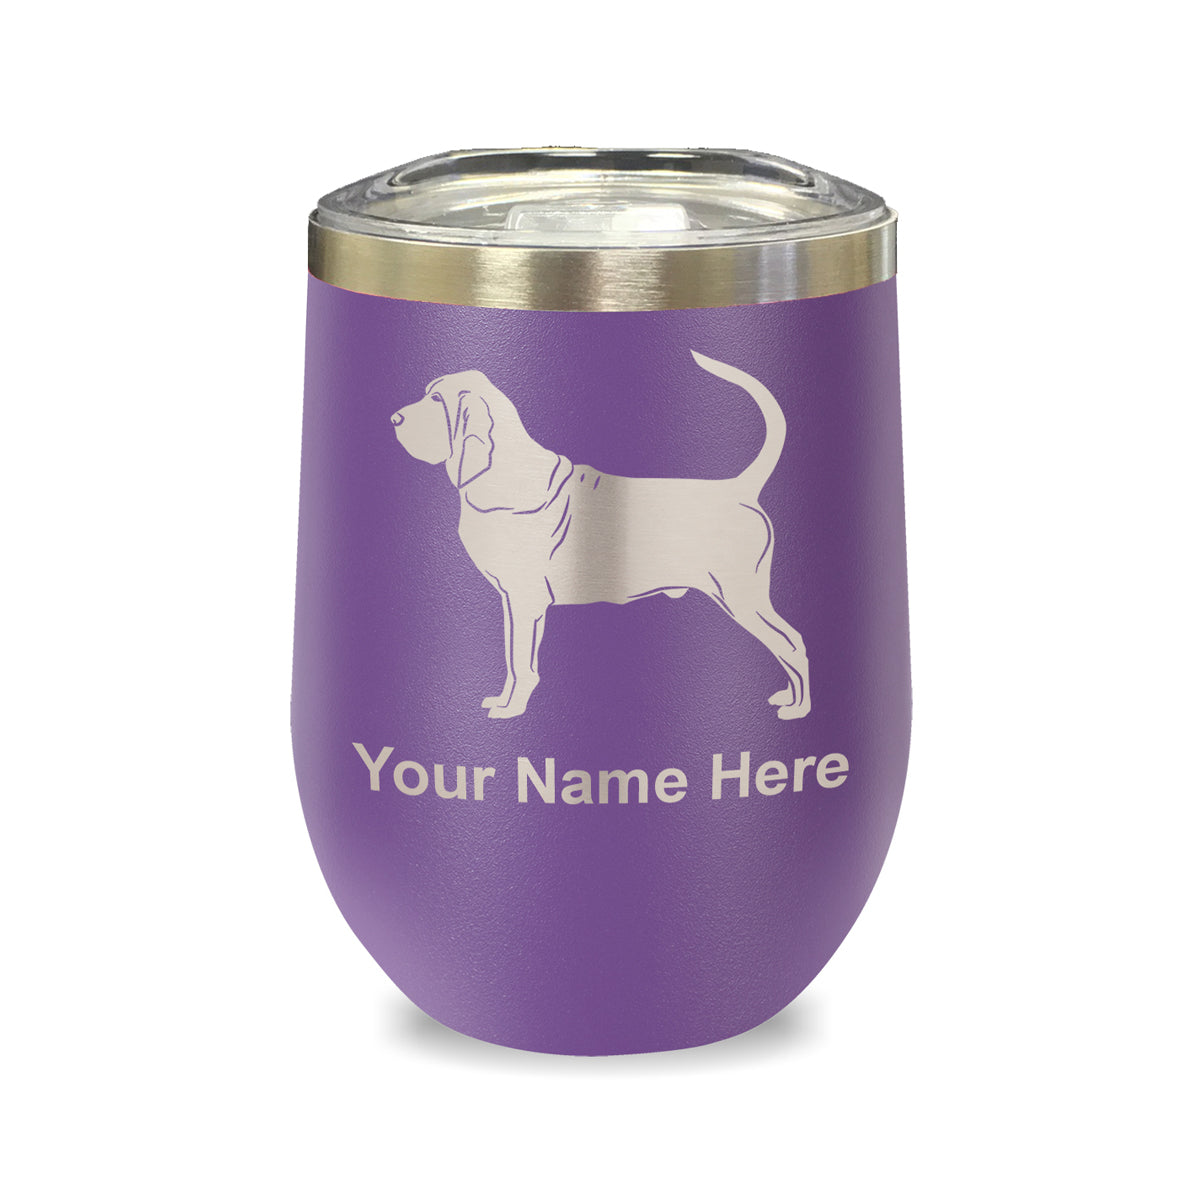 LaserGram Double Wall Stainless Steel Wine Glass, Bloodhound Dog, Personalized Engraving Included